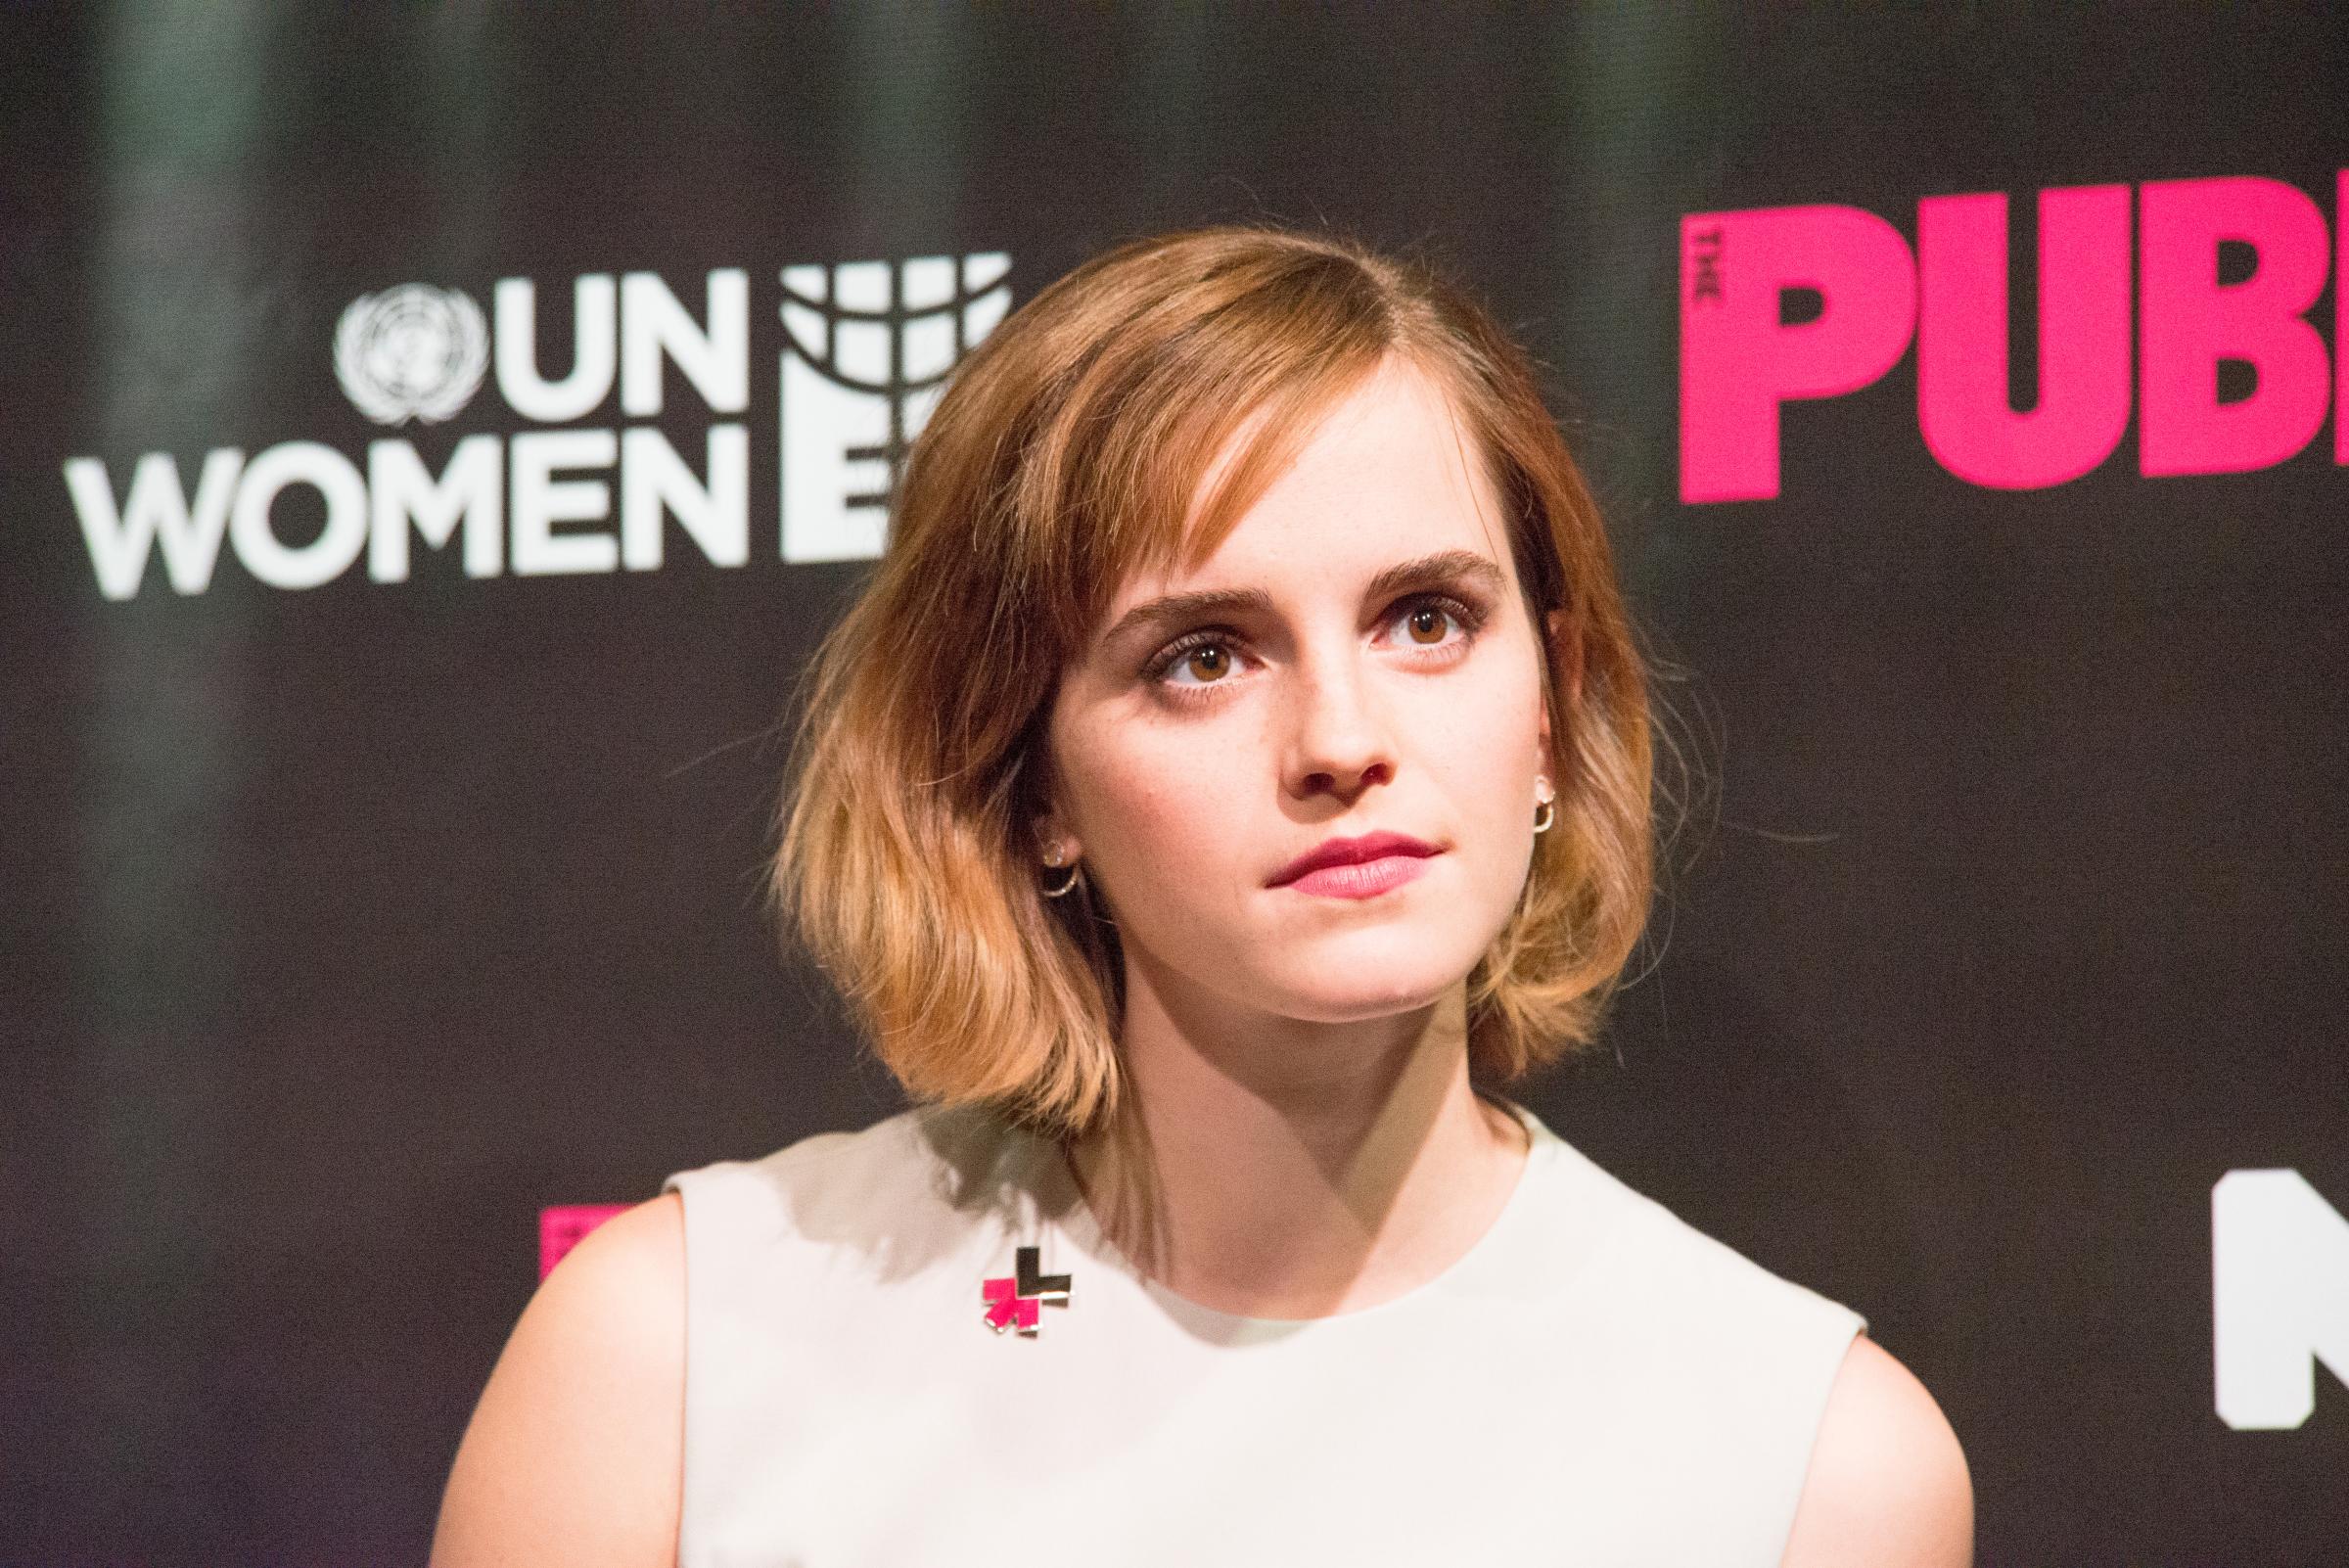 Emma Watson participates in the panel discussion. On International Women's Day, NYC First Lady Chirlaine McCray, UN Women Executive Director Phumzile Mlambo-Ngcuka, Actress and HeForShe advocate Emma Watson and Actor Forest Whitaker participated in a press briefing at Joe's Pub in the East Village of Manhattan for the launch of HeForShe Art Week (March 8-15).